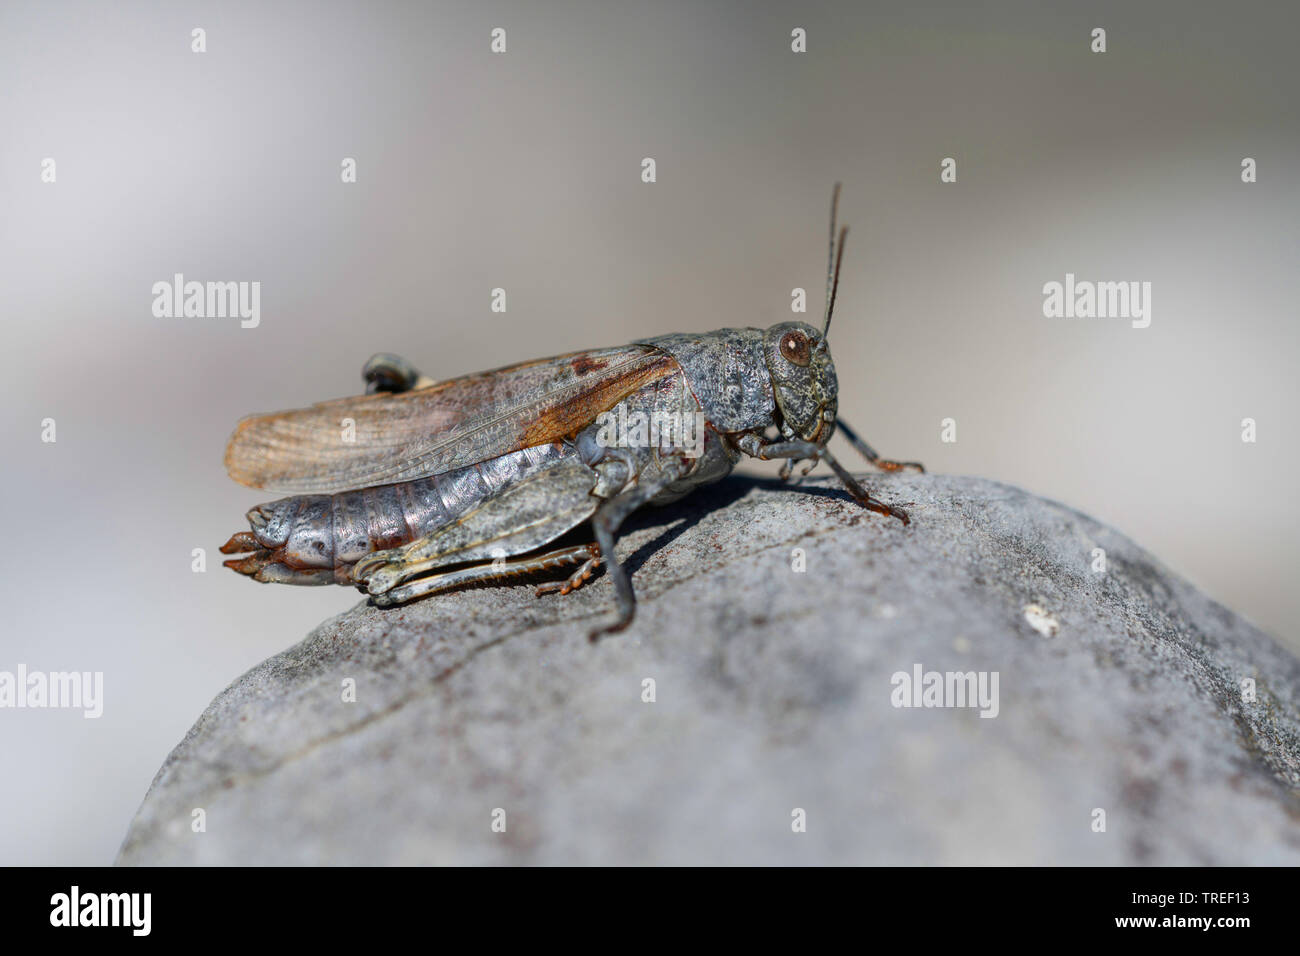 Speckled grasshopper, European Rose-winged Grasshopper  (Bryodema tuberculata, Bryodemella tuberculata), sitting on a stone, Germany, Bavaria Stock Photo